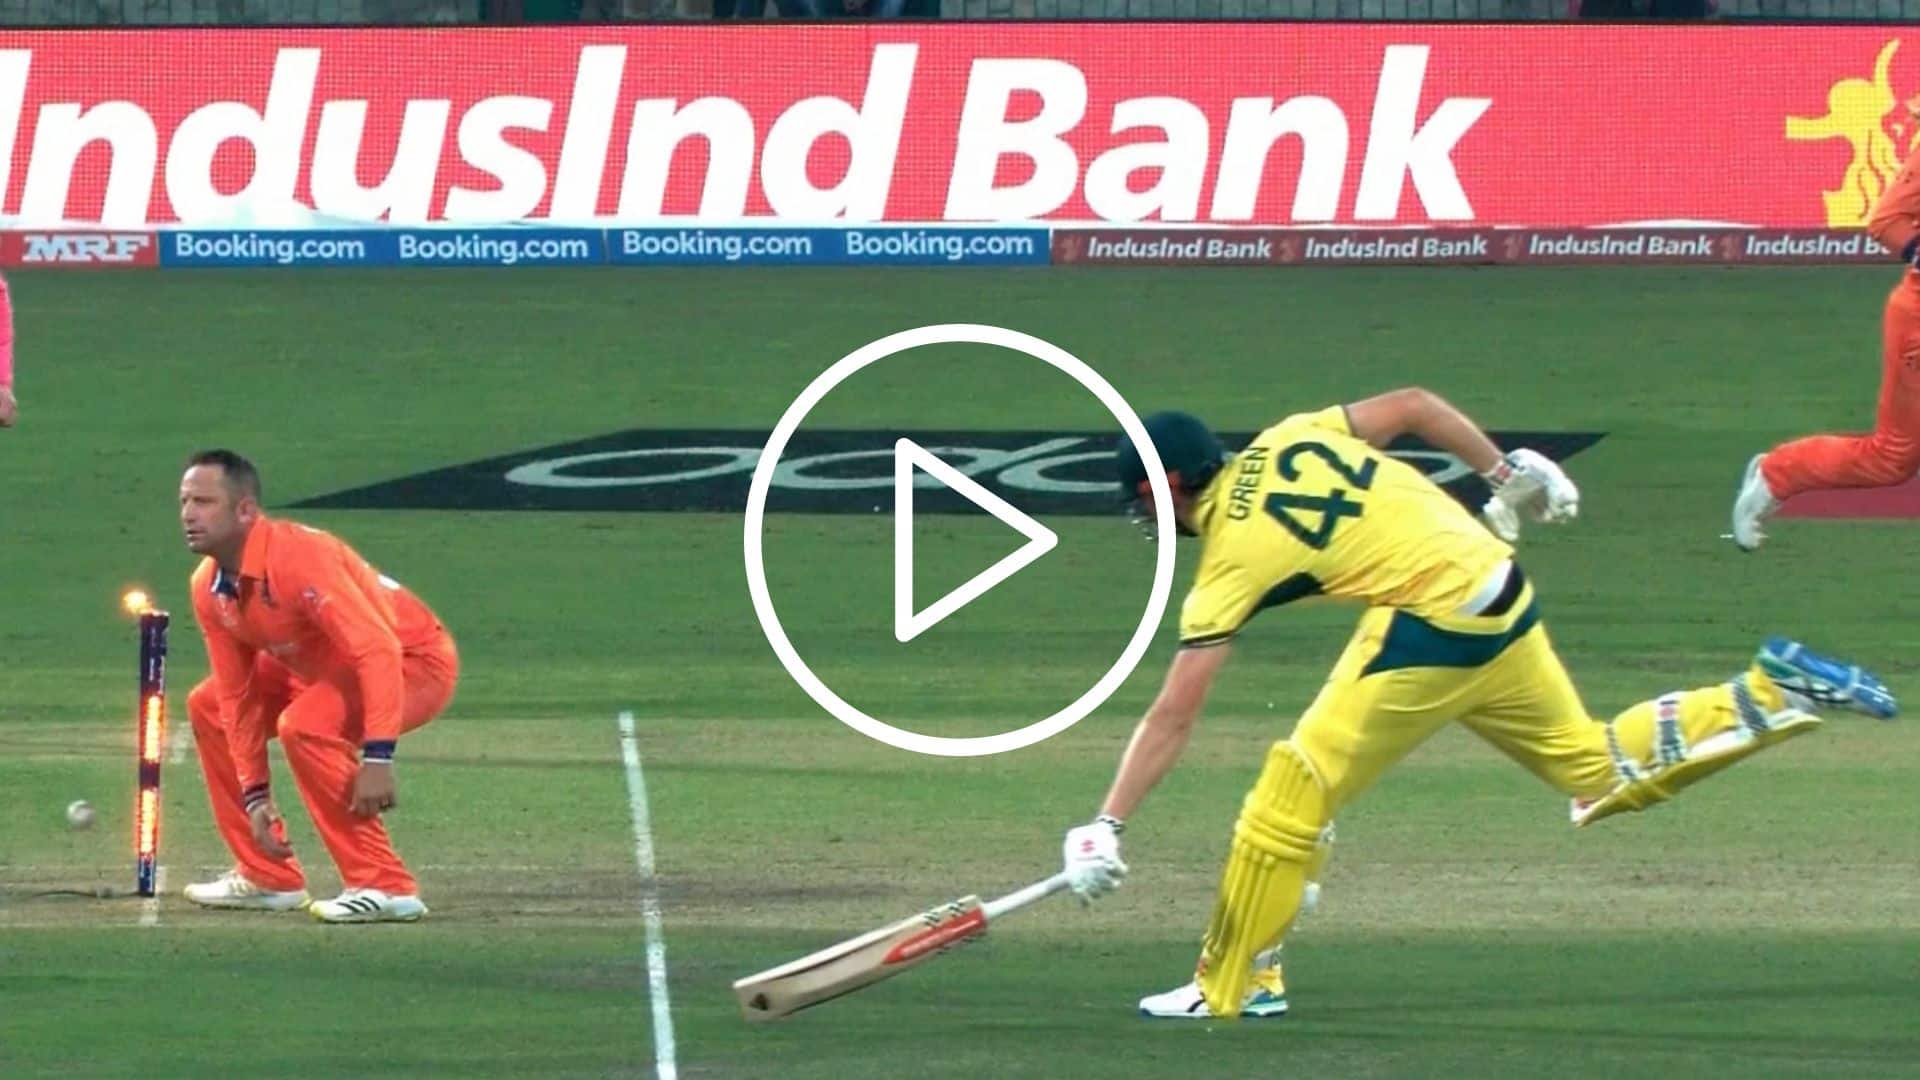 [Watch] Huge Mix-Up & Engelbrecht's Direct Hit Leads To Cameron Green's Disastrous Runout